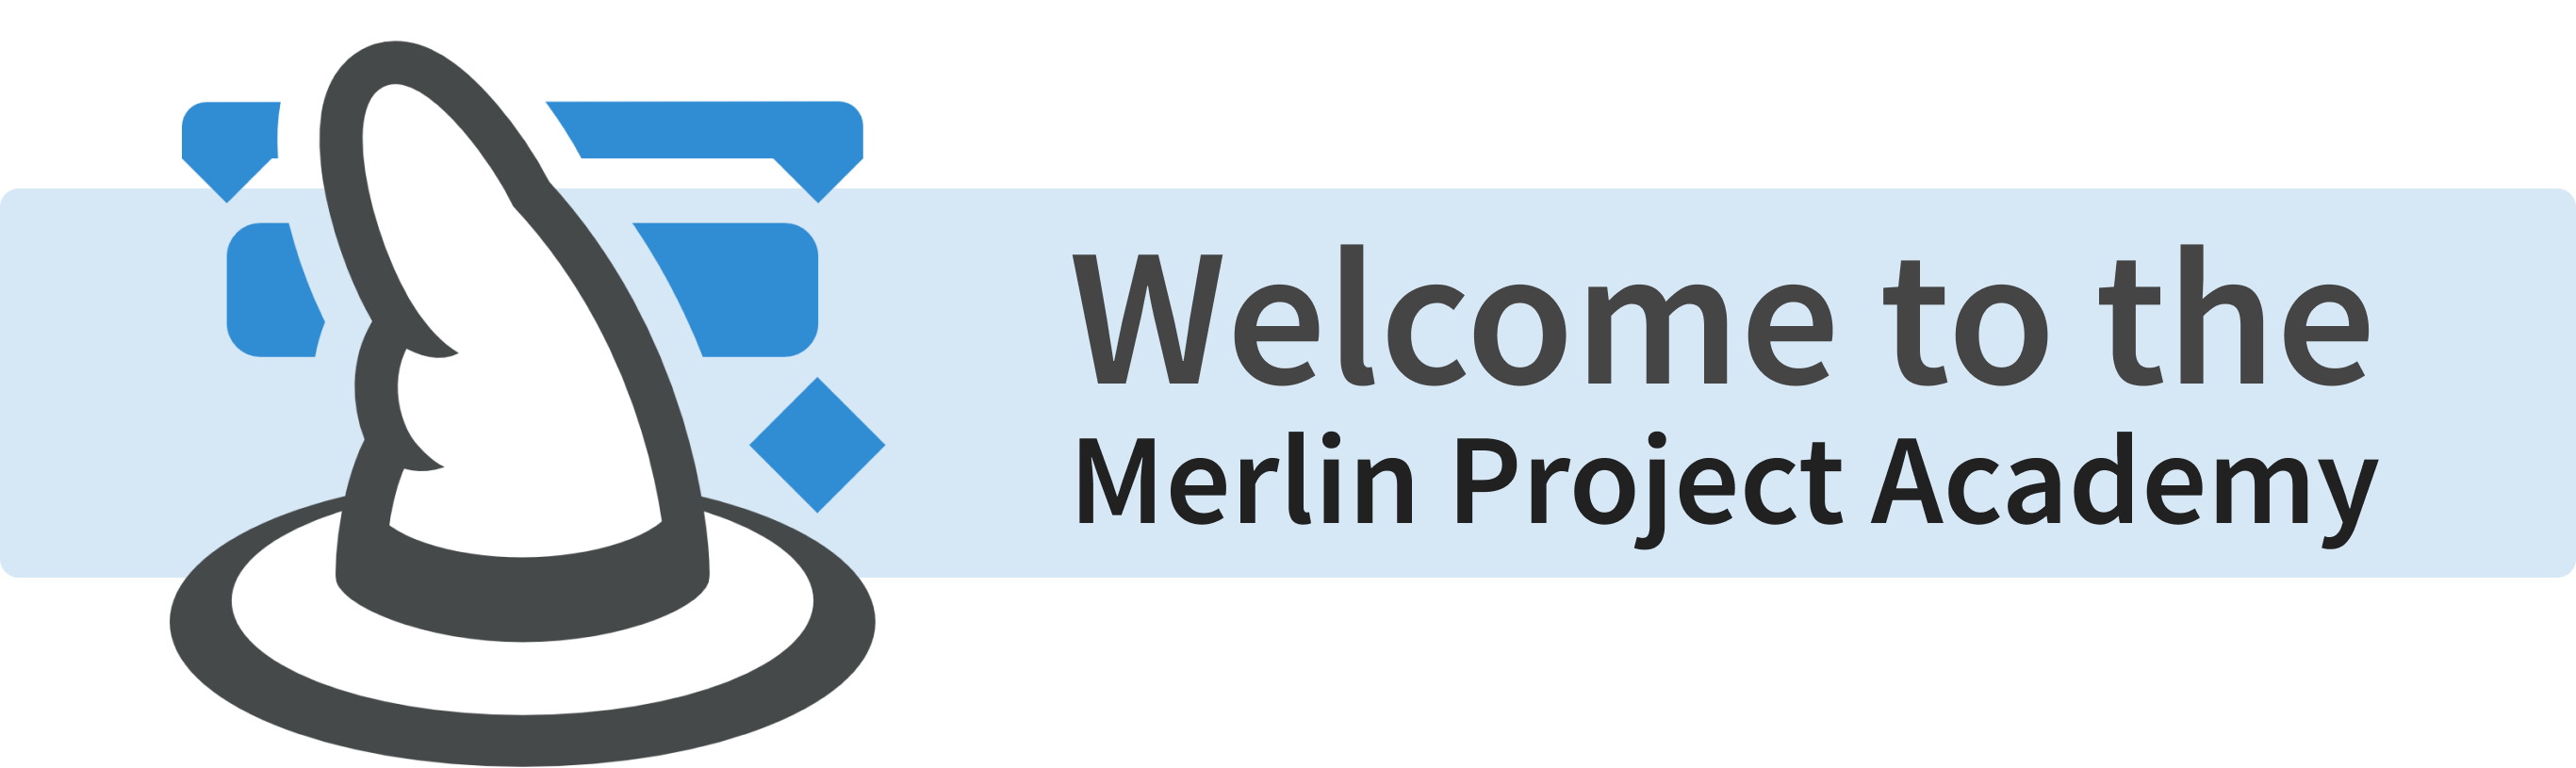 Welcome to the Merlin Project Academy